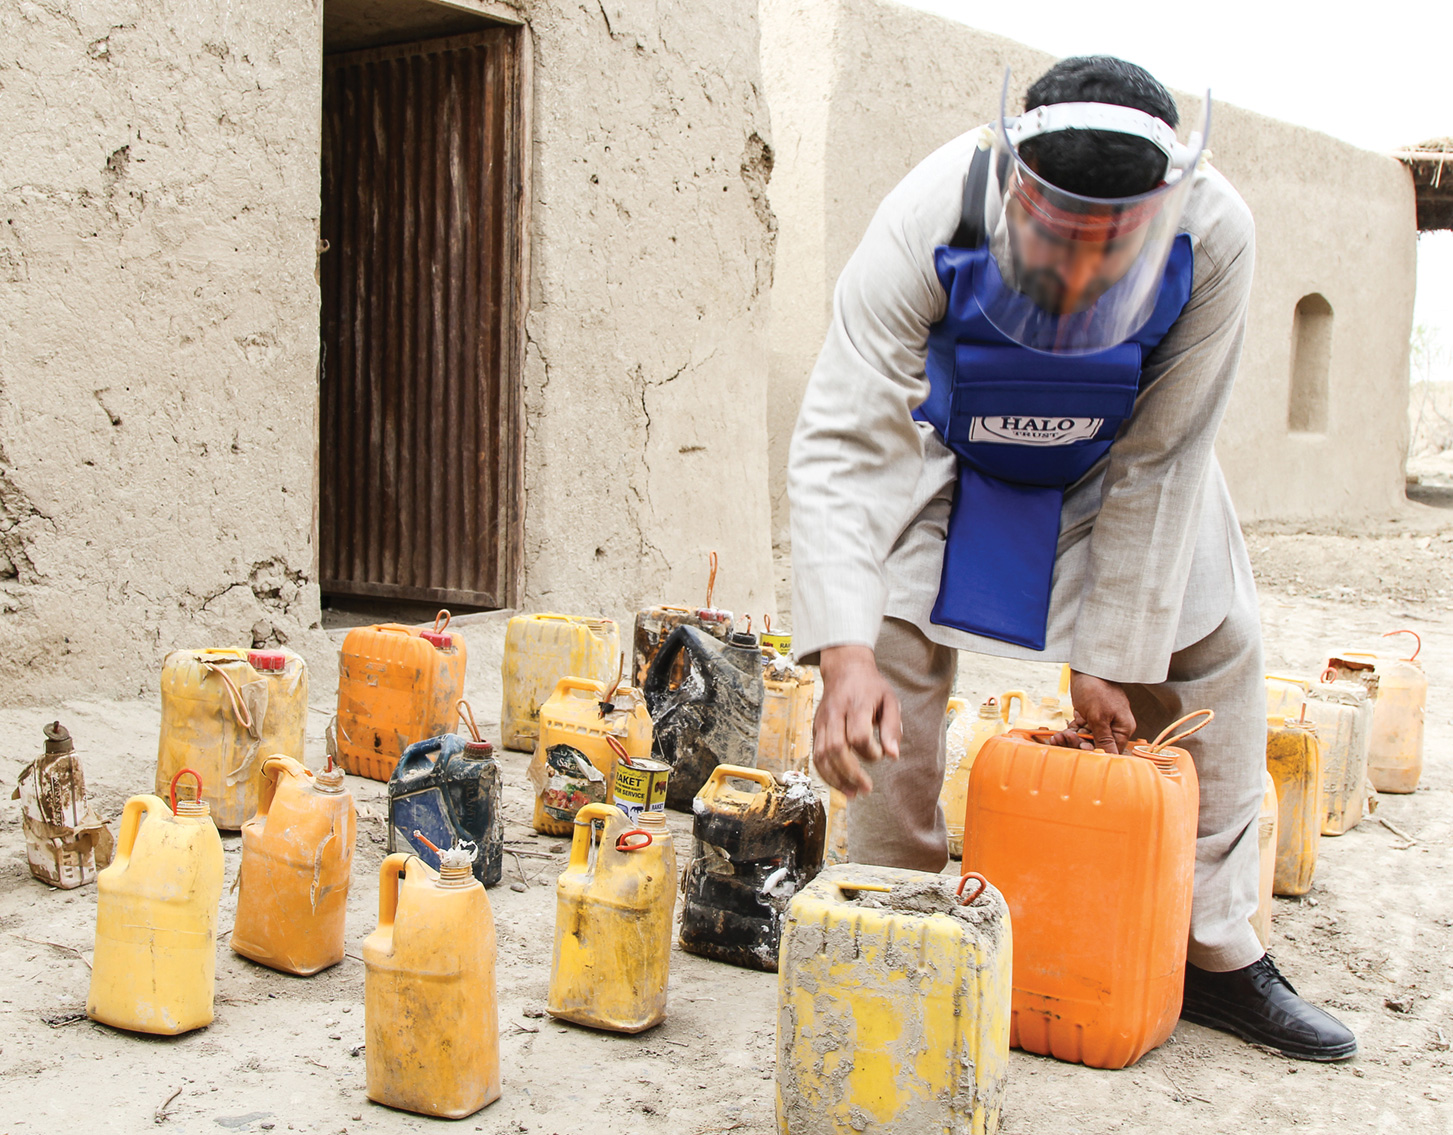 A person in protective gear leans over numerous plastic bottles